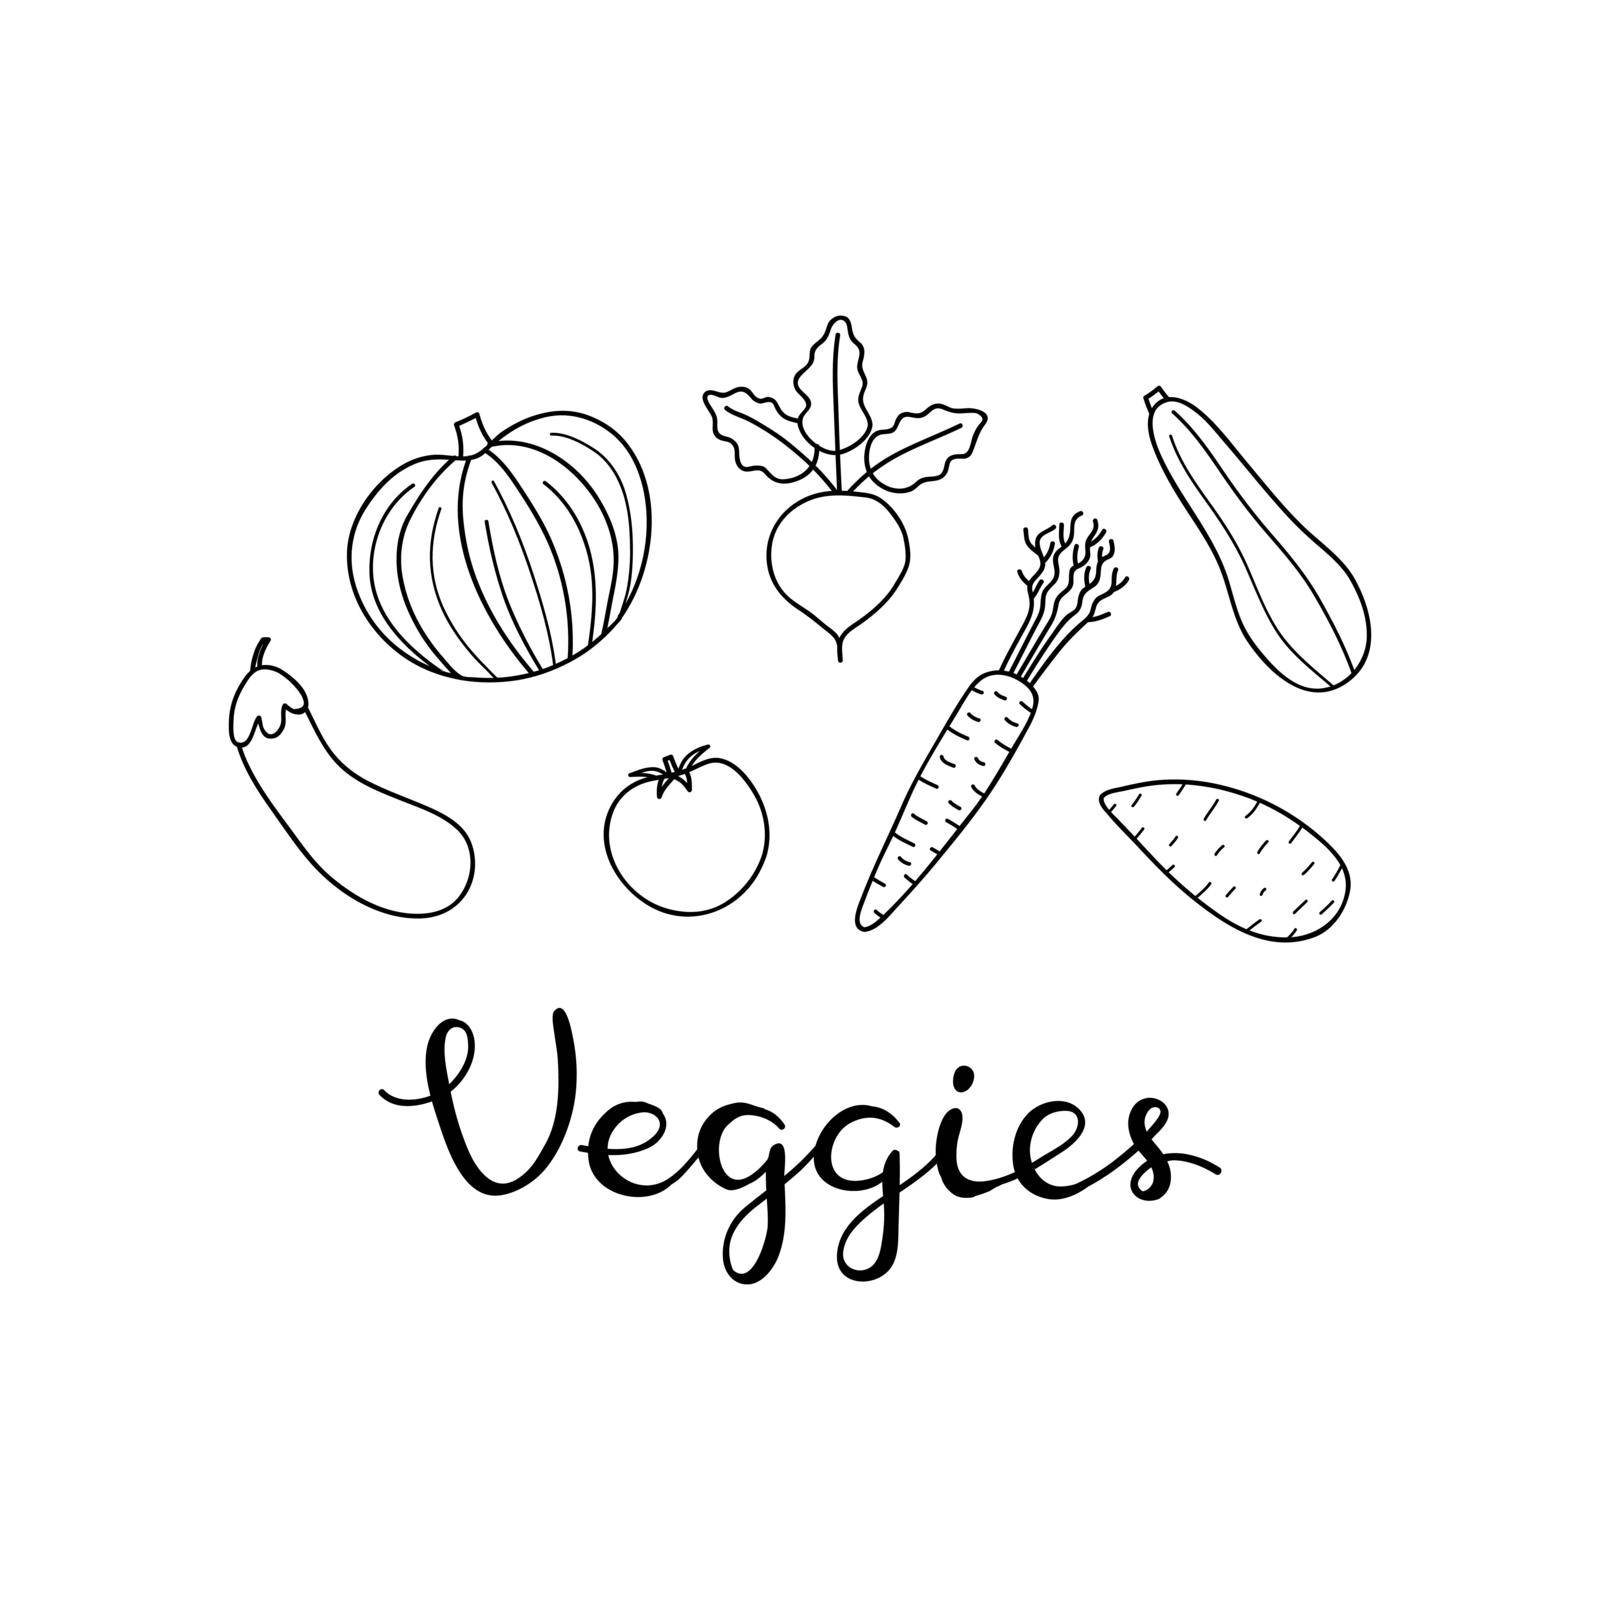 Composition with veggies and lettering. by Minur